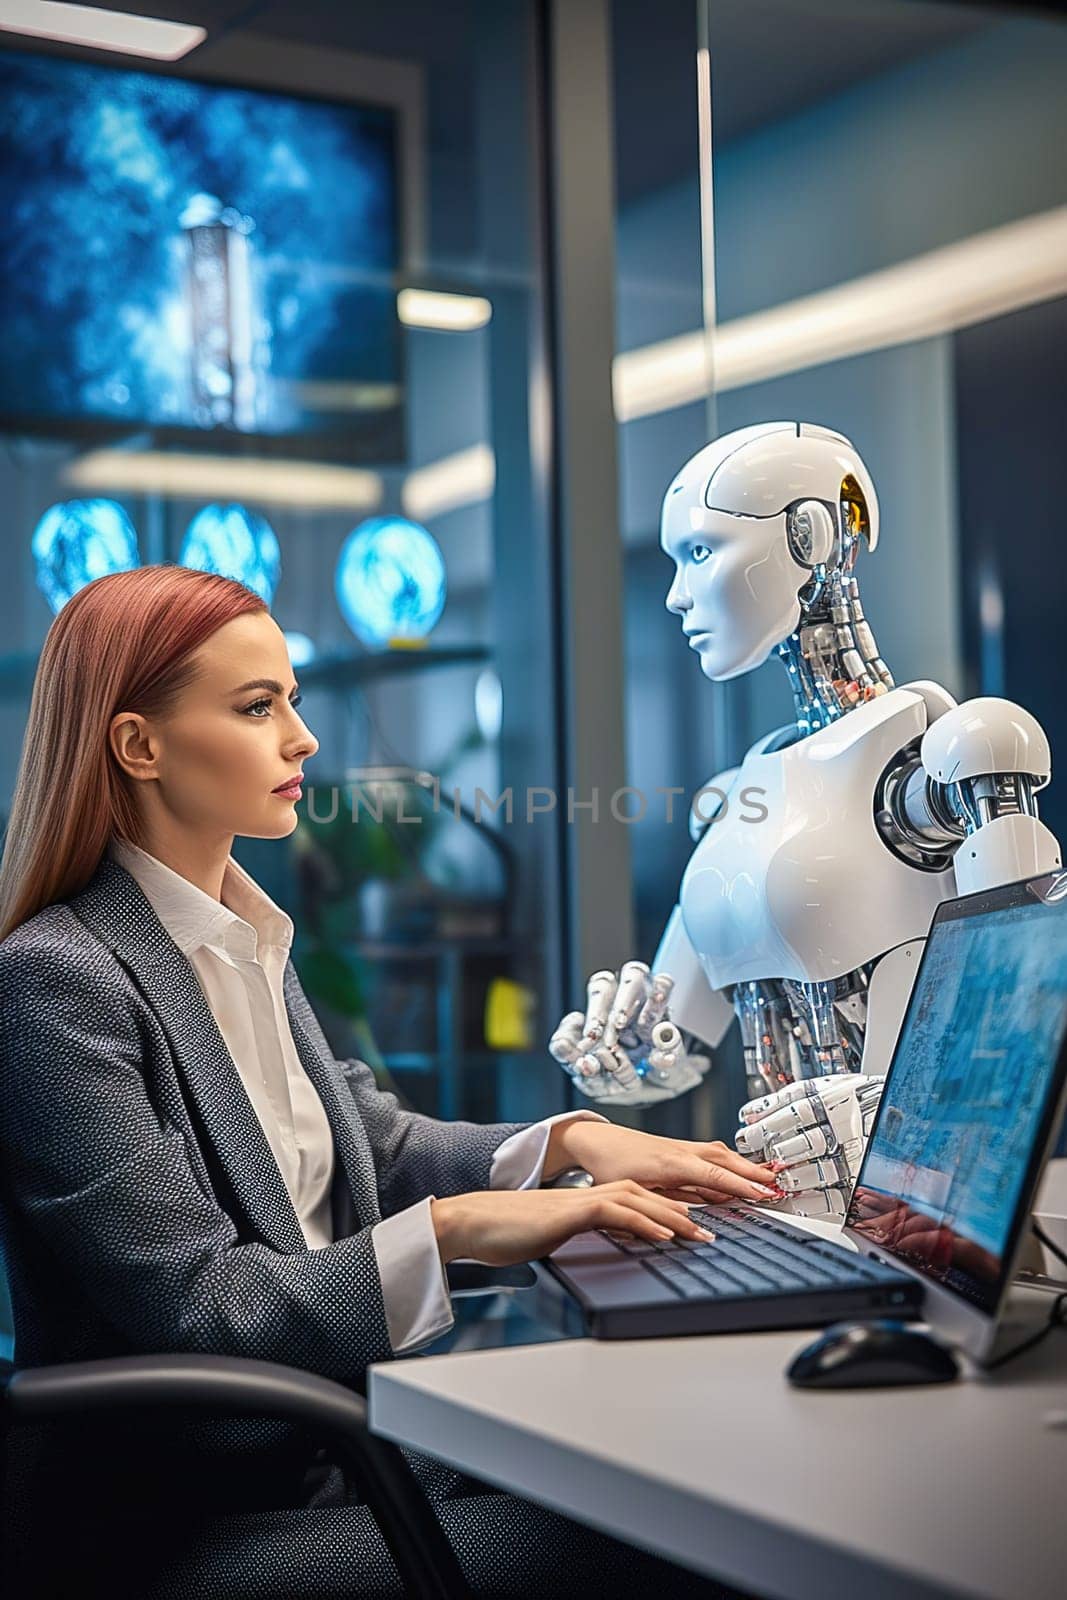 A woman at a computer programs a humanoid robot. by Yurich32